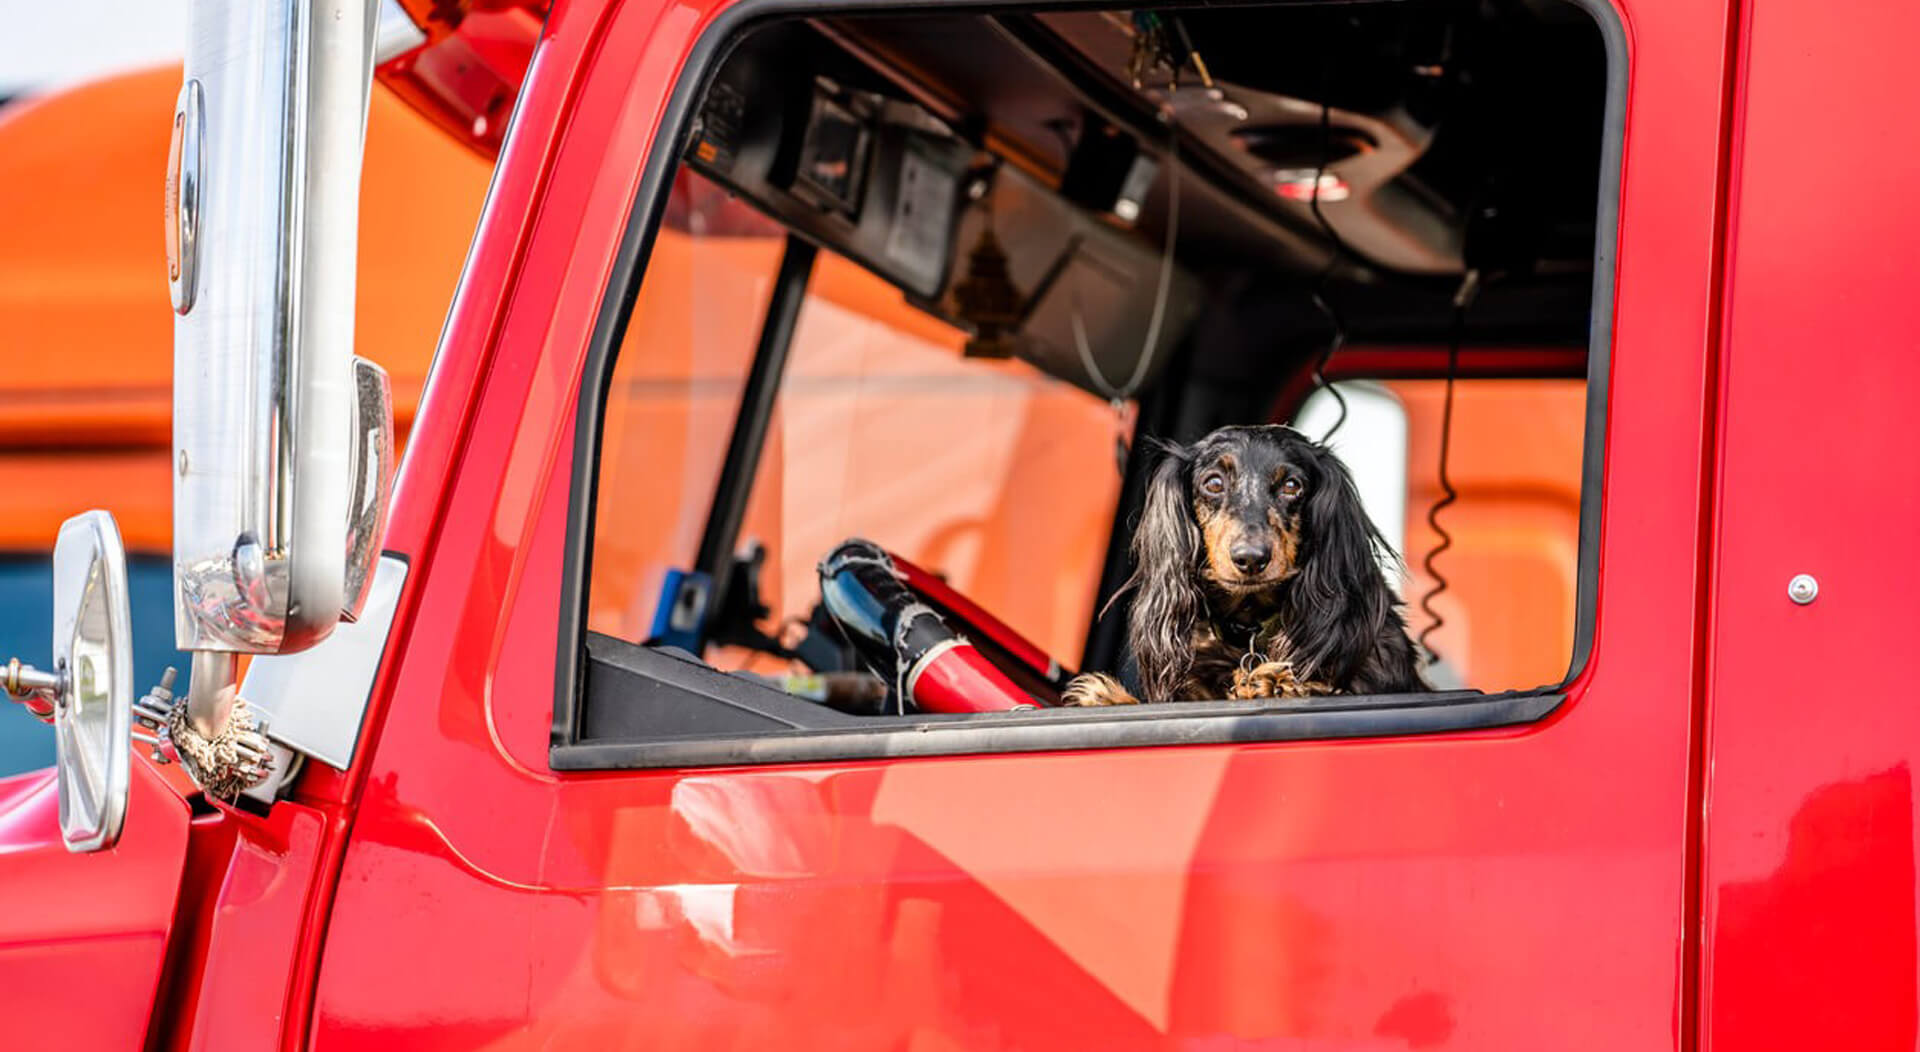 truck driver's pet sitting on the driver's seat of a red semi truck